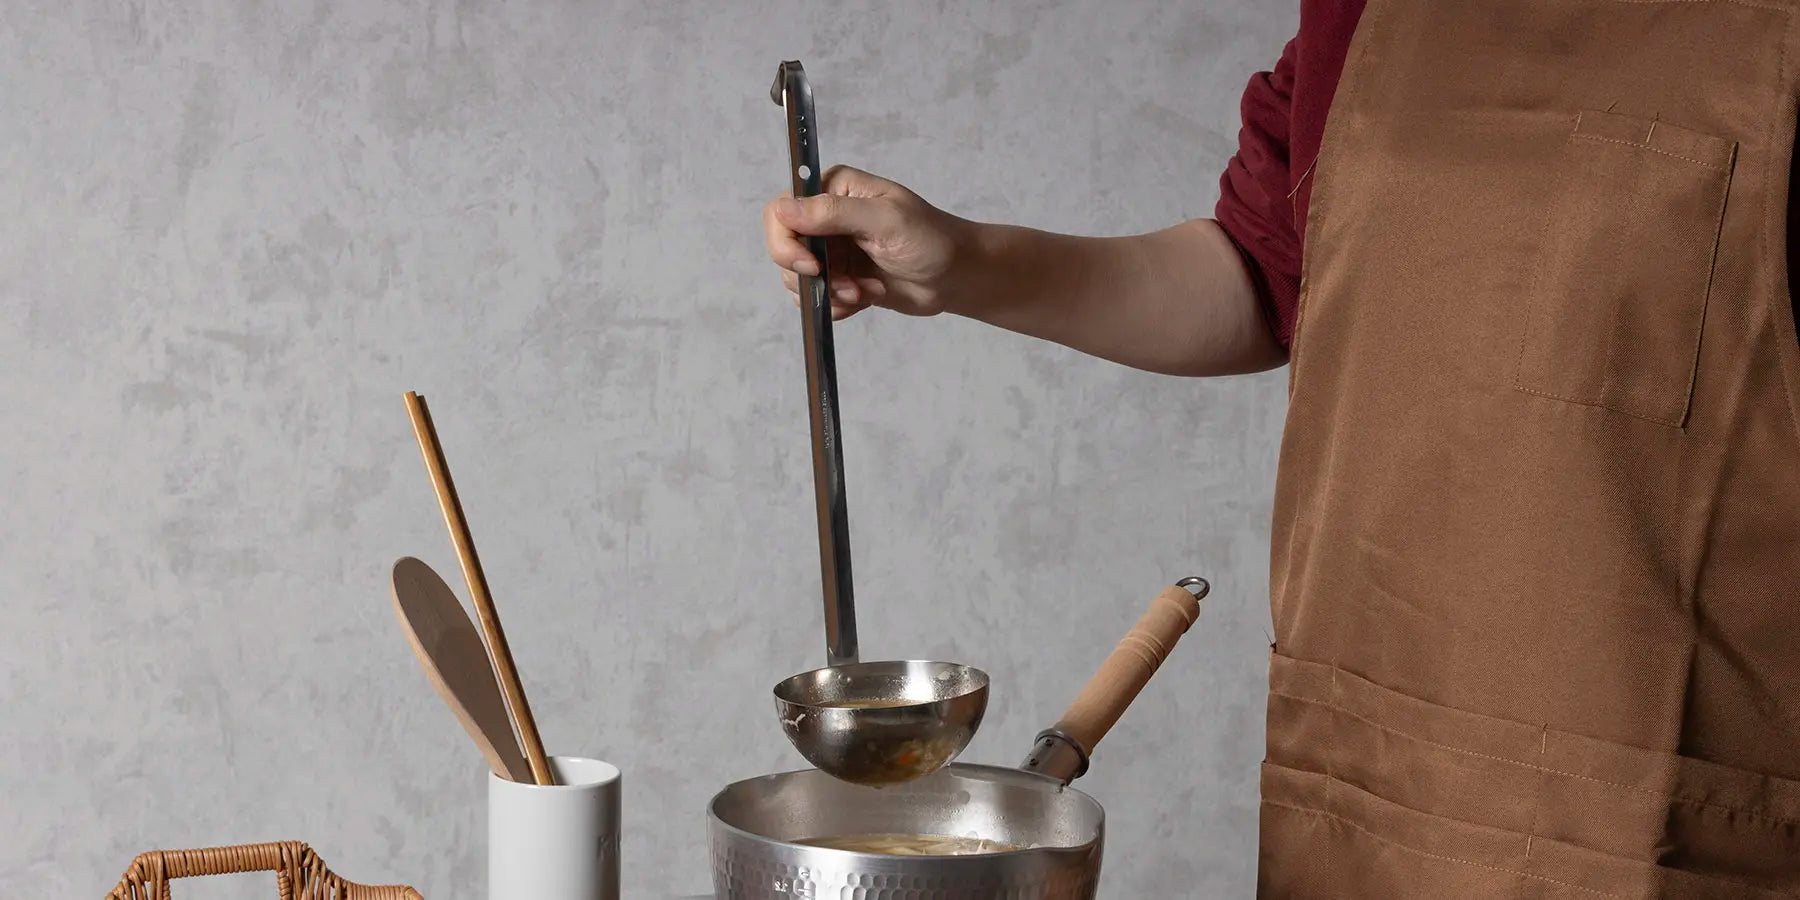 Discover our great selection of Ladles at Globalkitchen Japan.